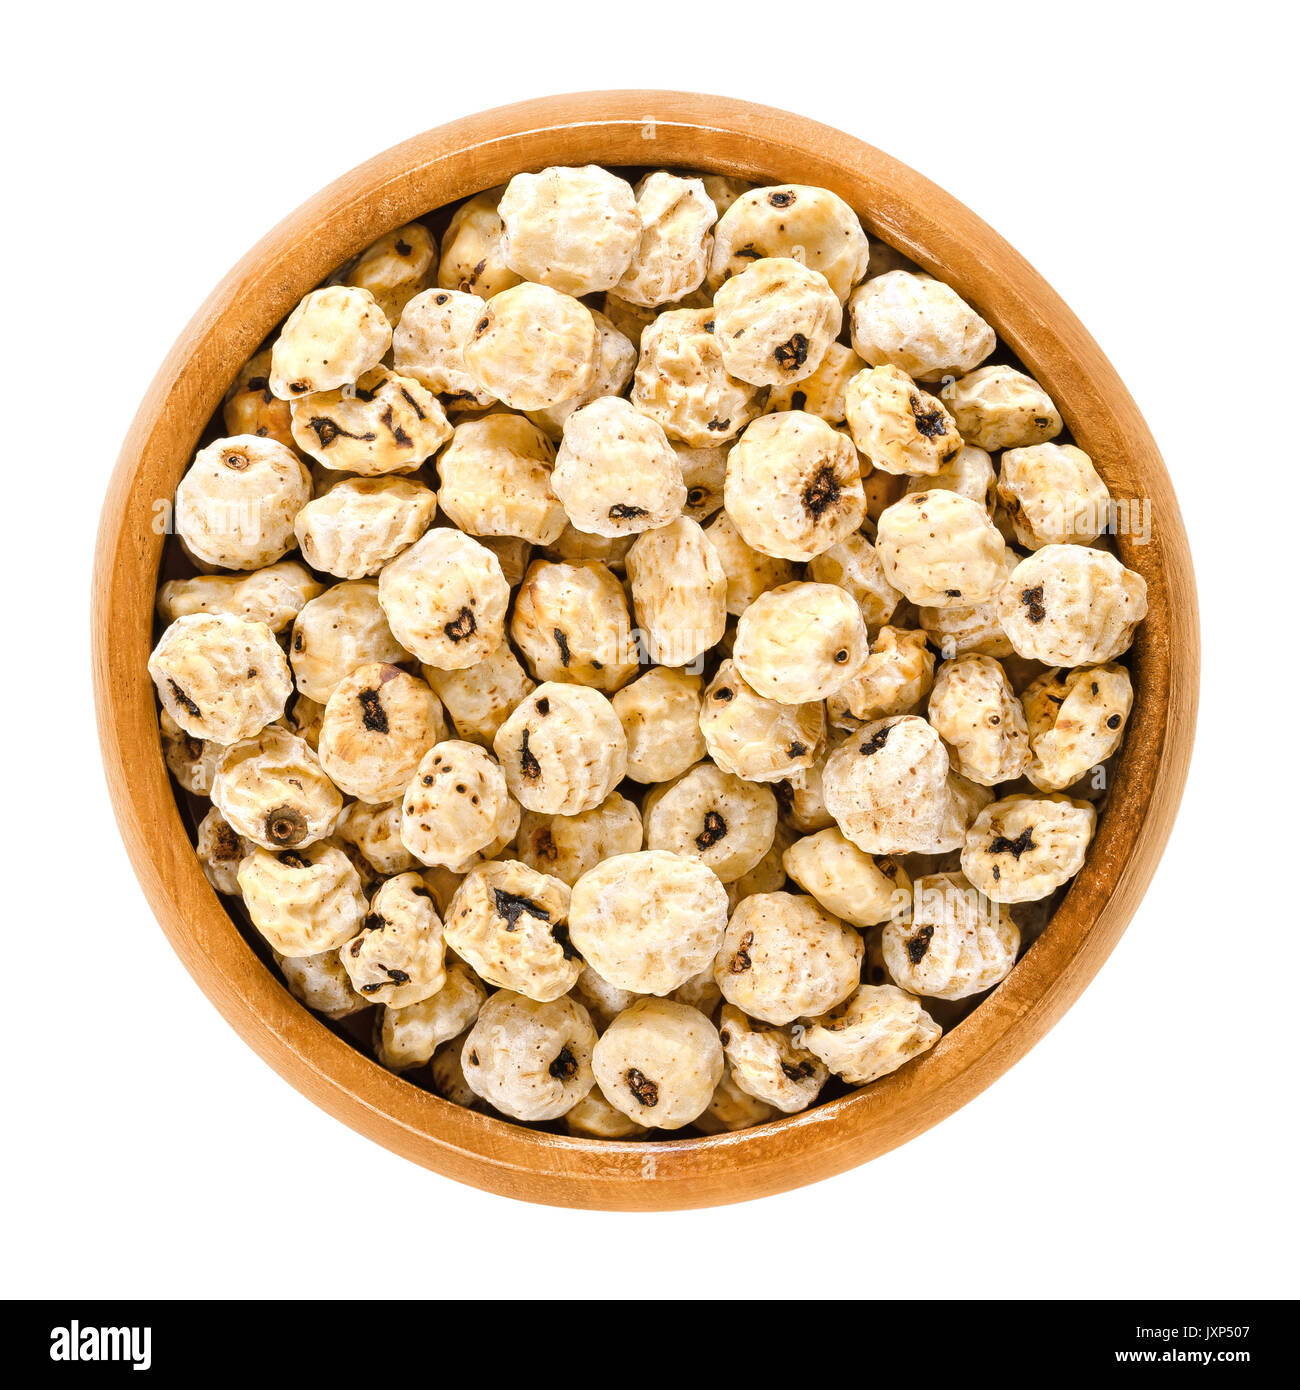 Tiger nuts in wooden bowl. Blanched and dried tubers of Cyperus esculentus. Earth almond, chufa sedge, nut grass or yellow nutsedge. Macro food photo. Stock Photo